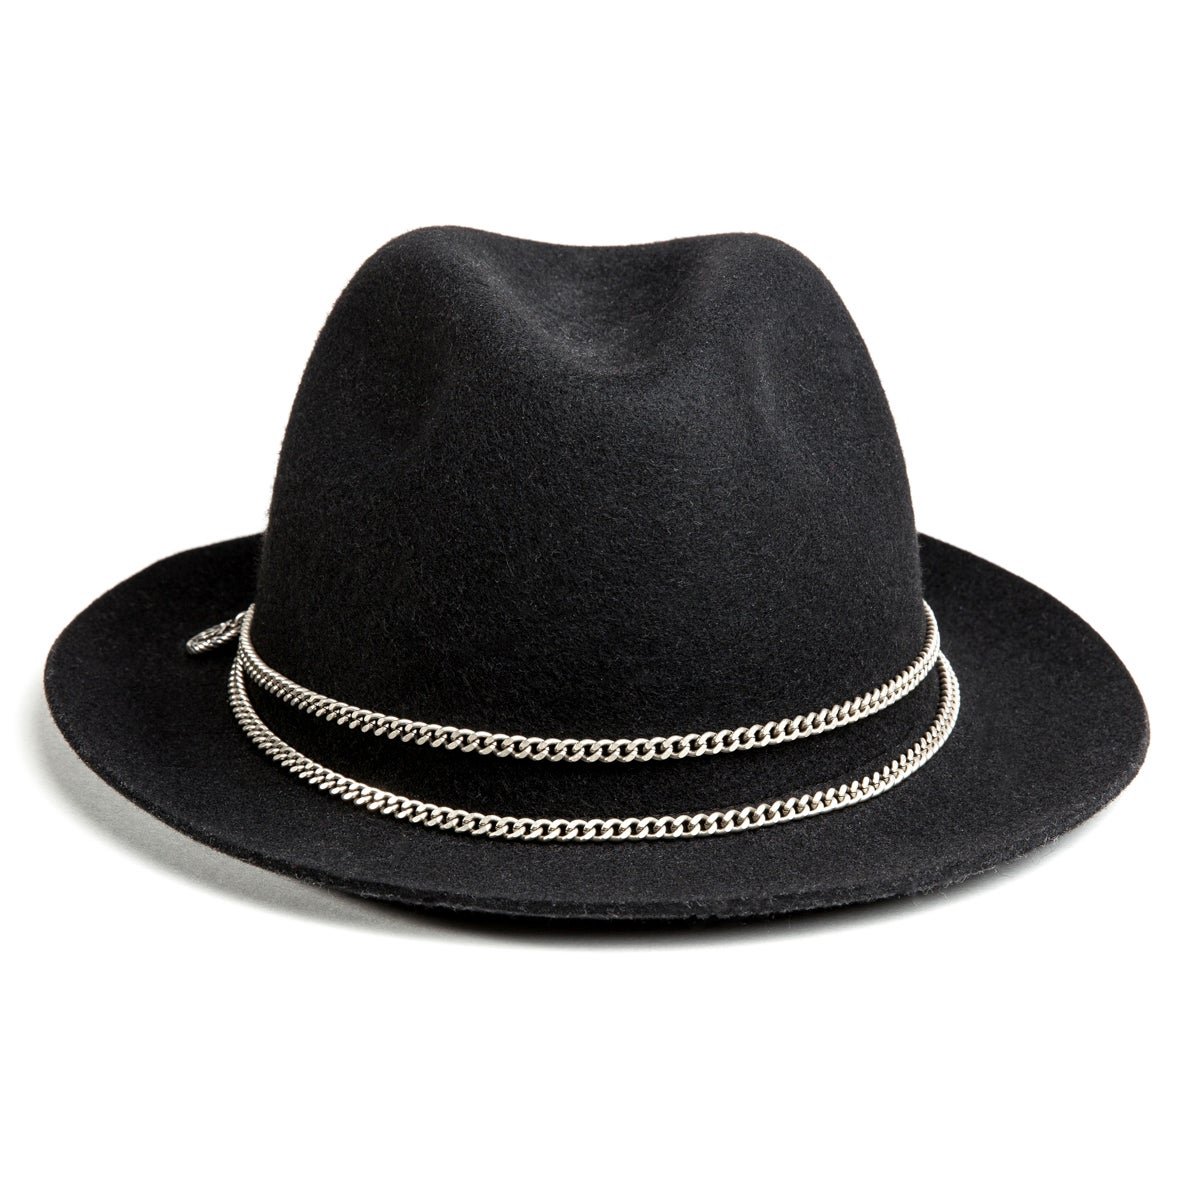 GREY OR TRILBY JAPPELOUP SILVER